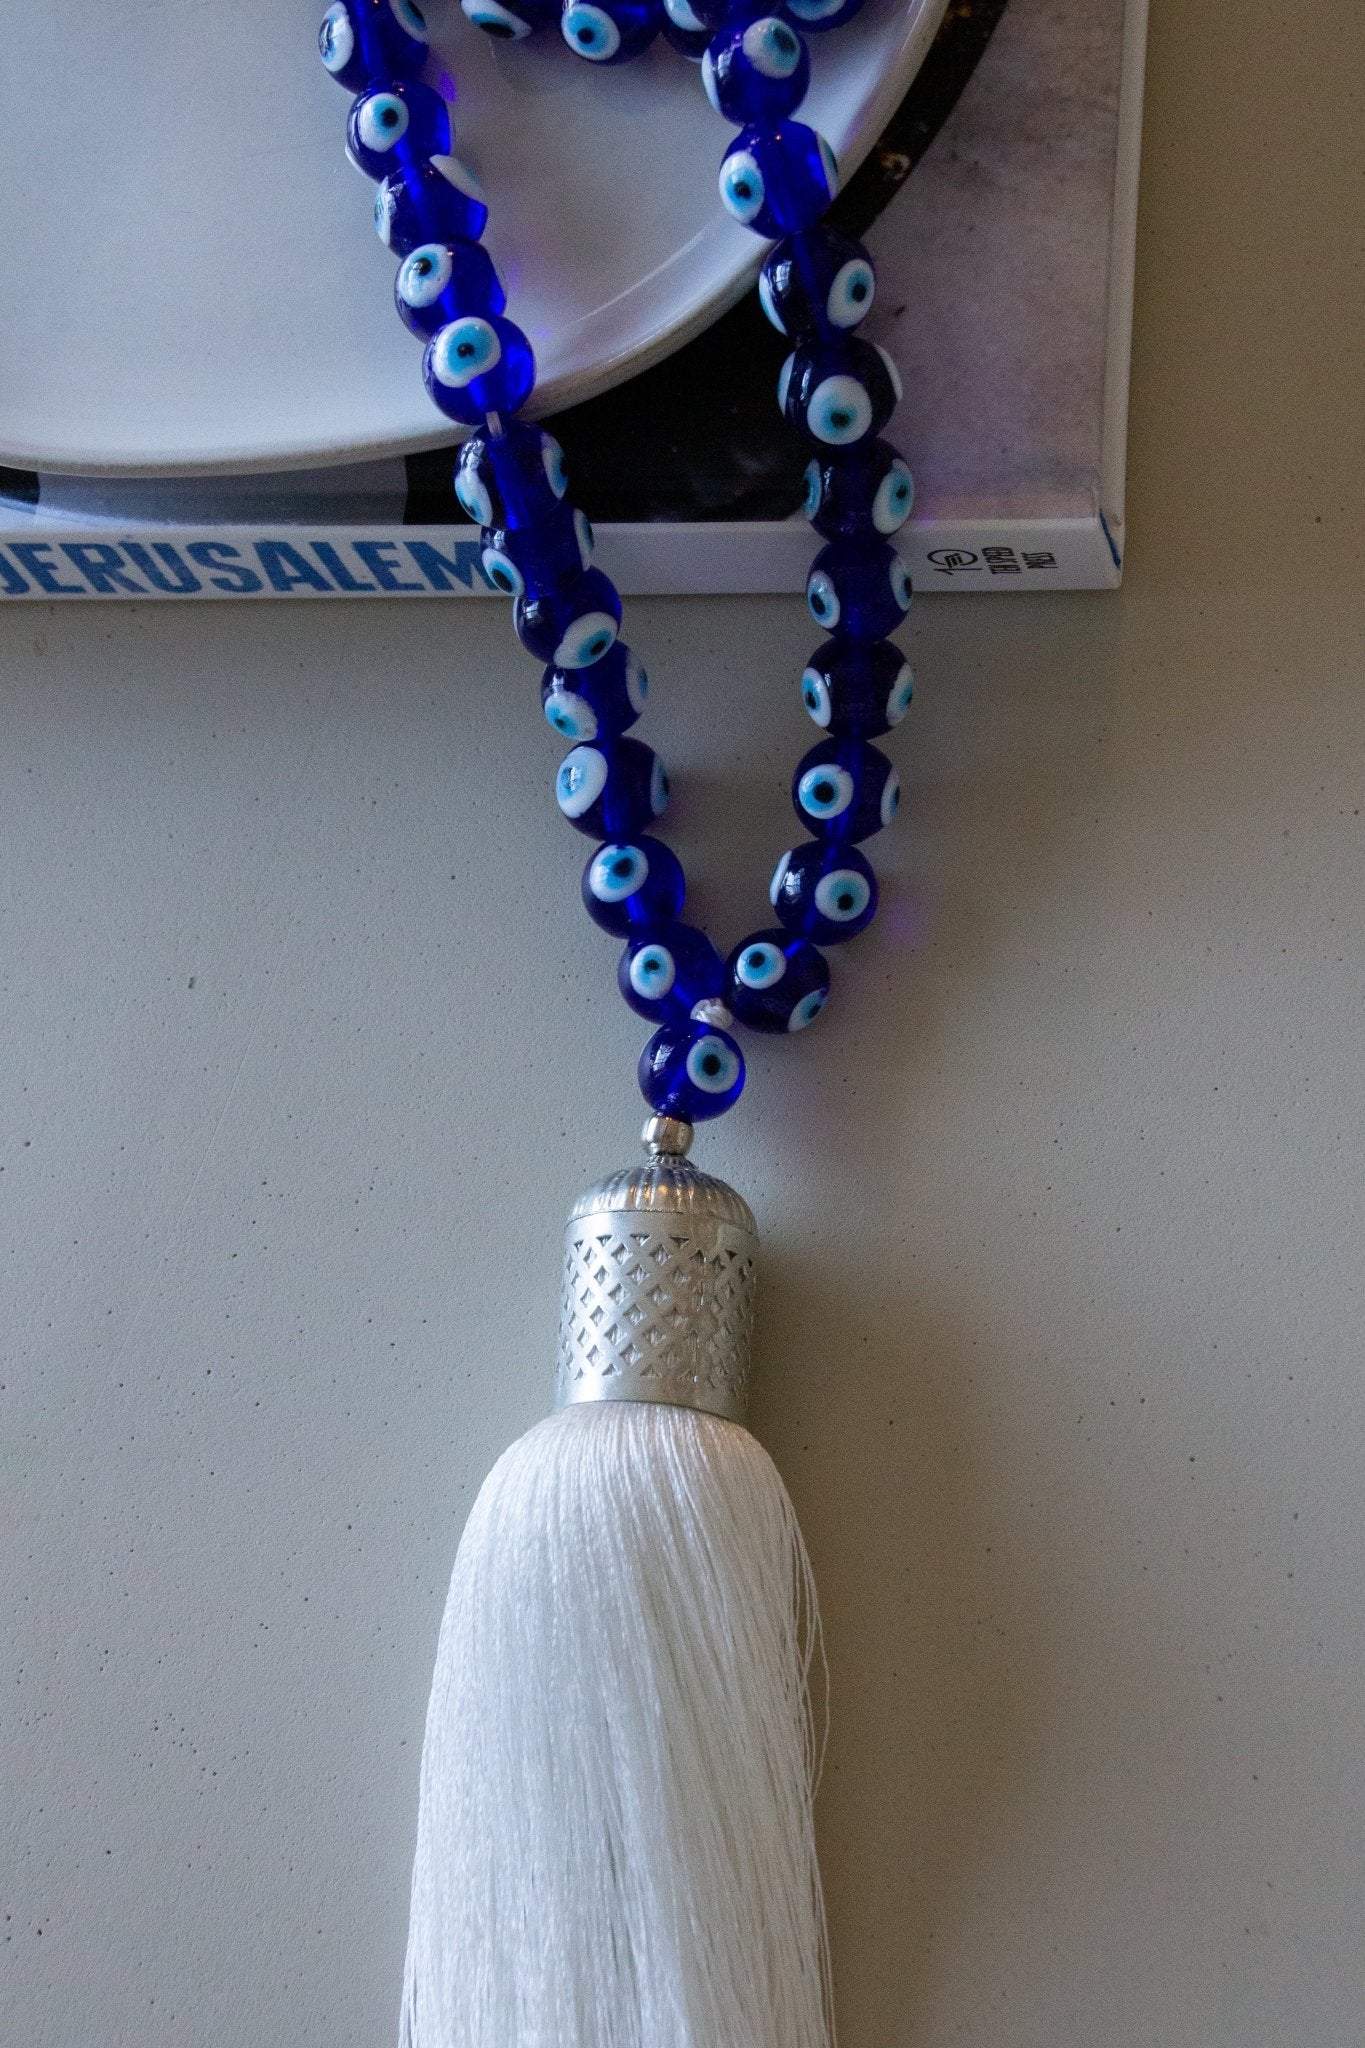 Evil eye Royal blue glass beads home decor necklace with white silk tassel - Stylish Luck Home Decor | Hamsa \ Hand Of Fatima | Good Luck Gifts